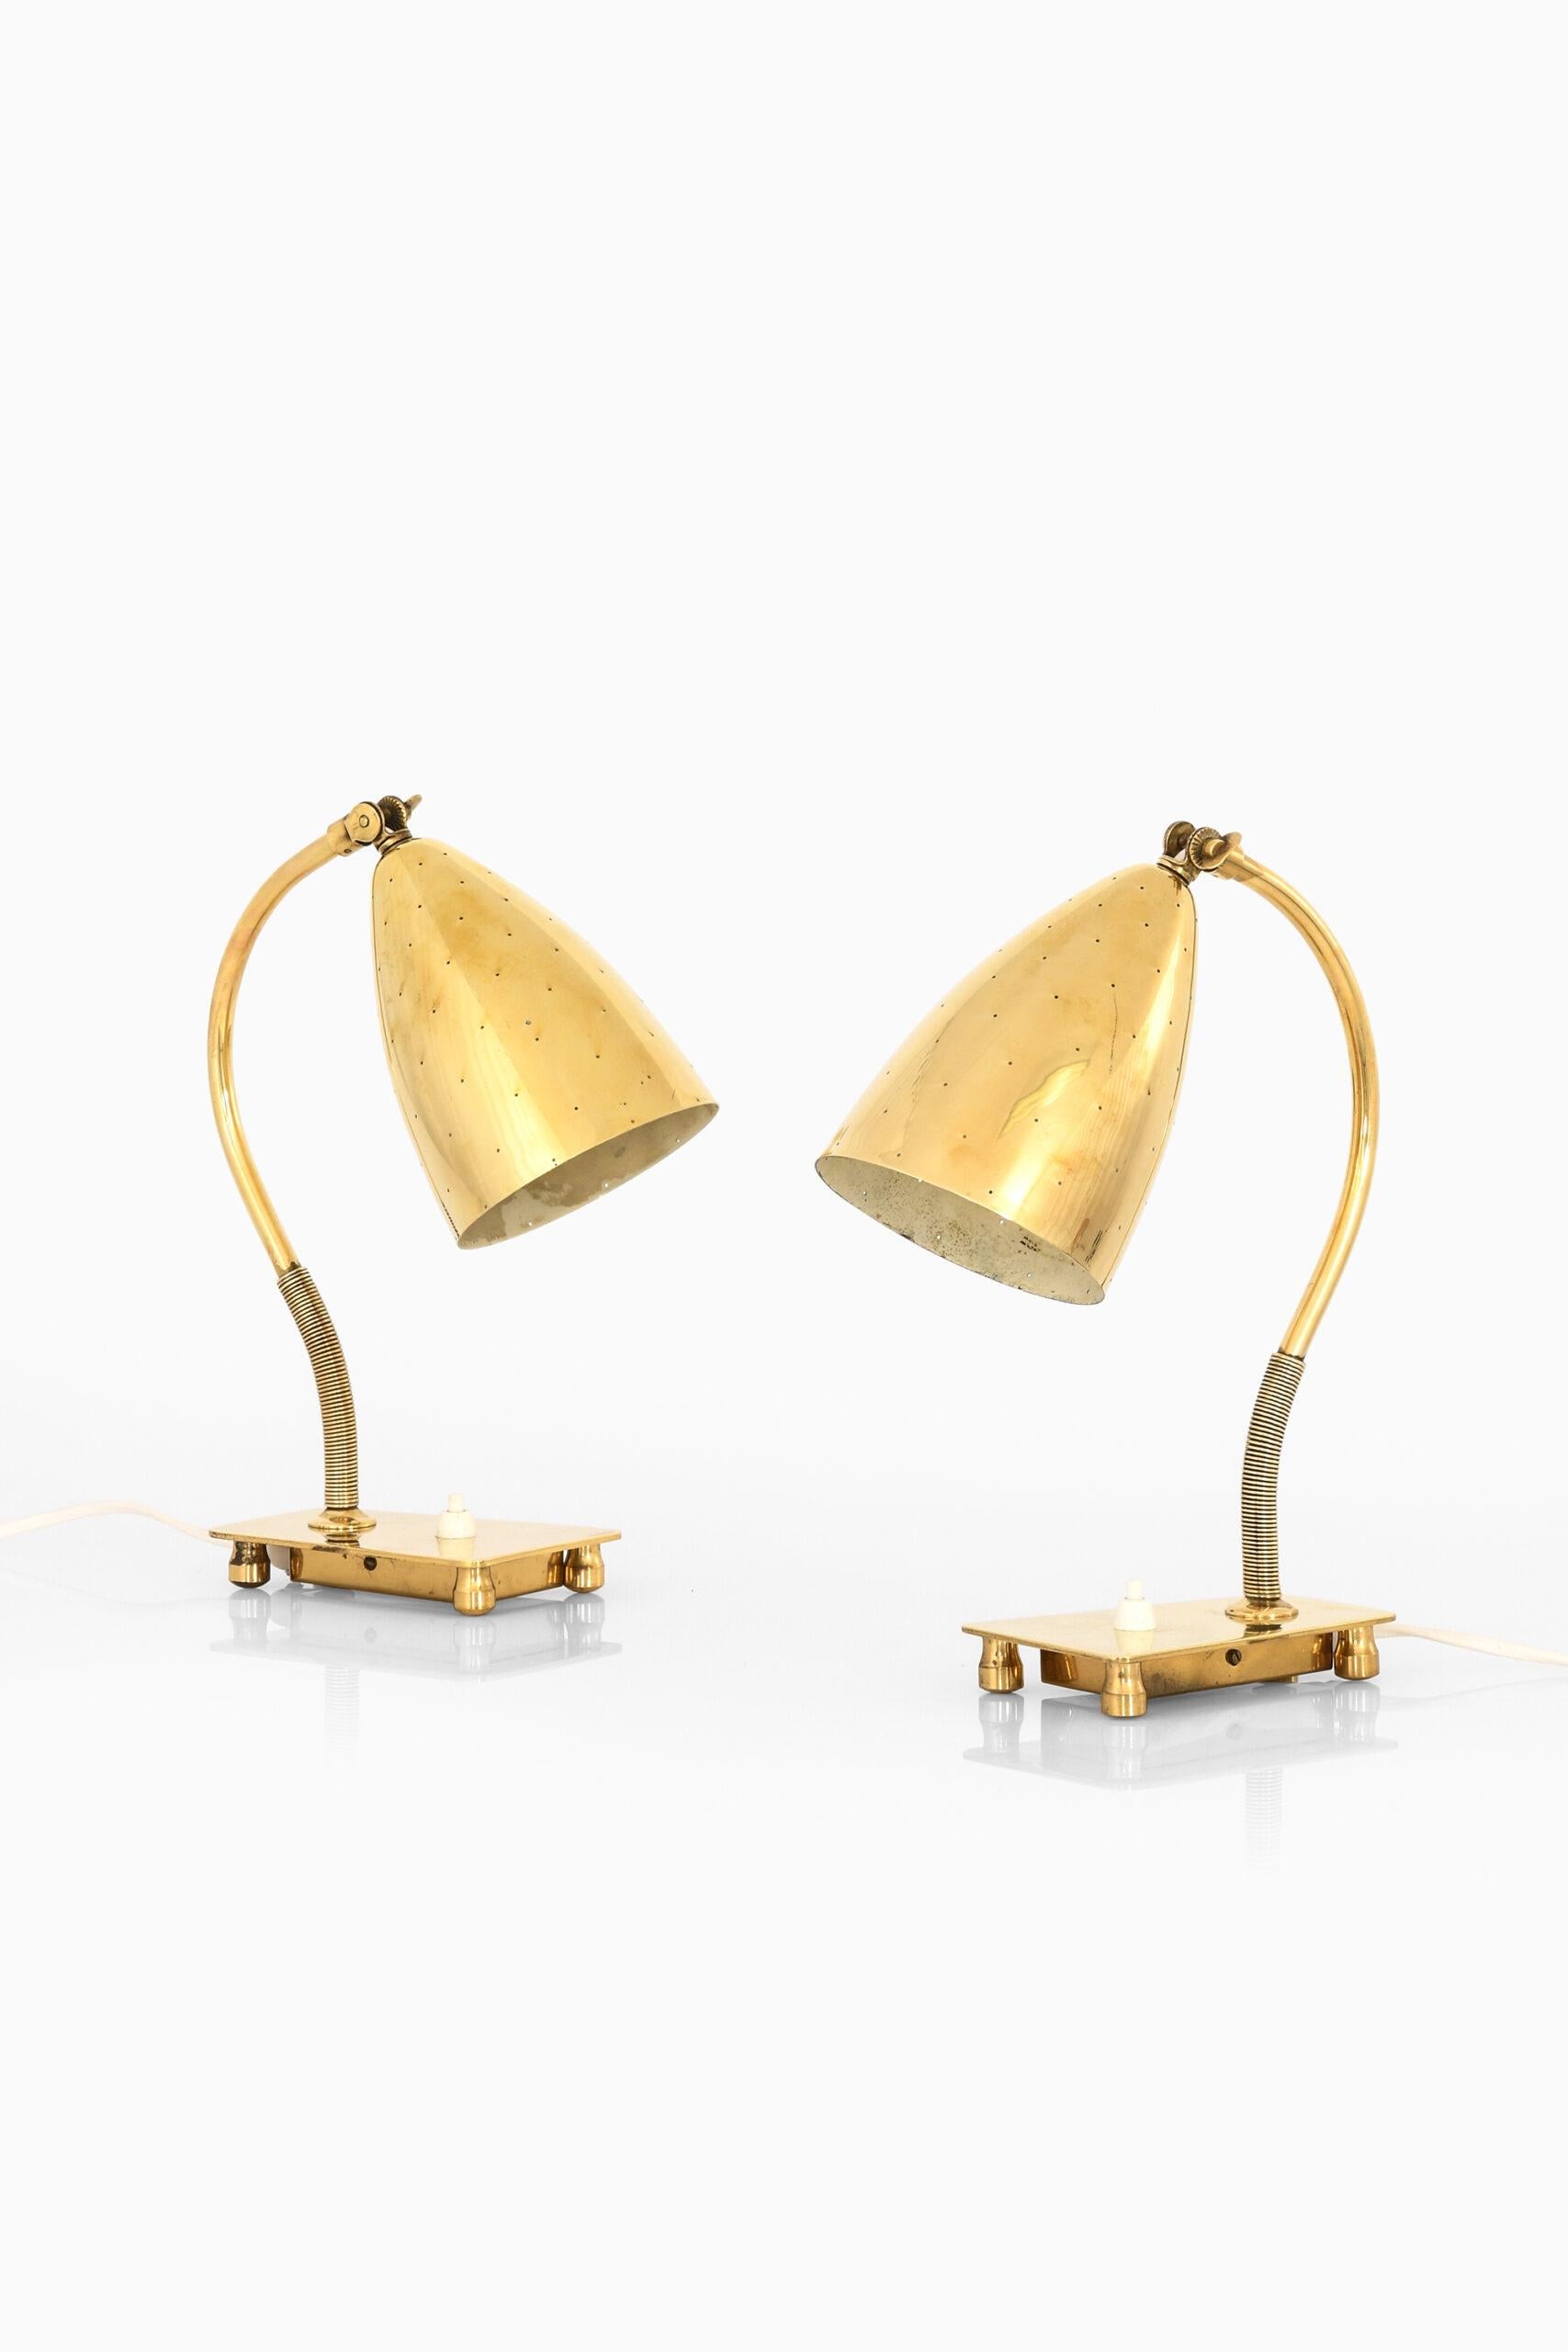 Rare pair of table lamps model EV 54 by unknown designer. Produced by Itsu in Finland.